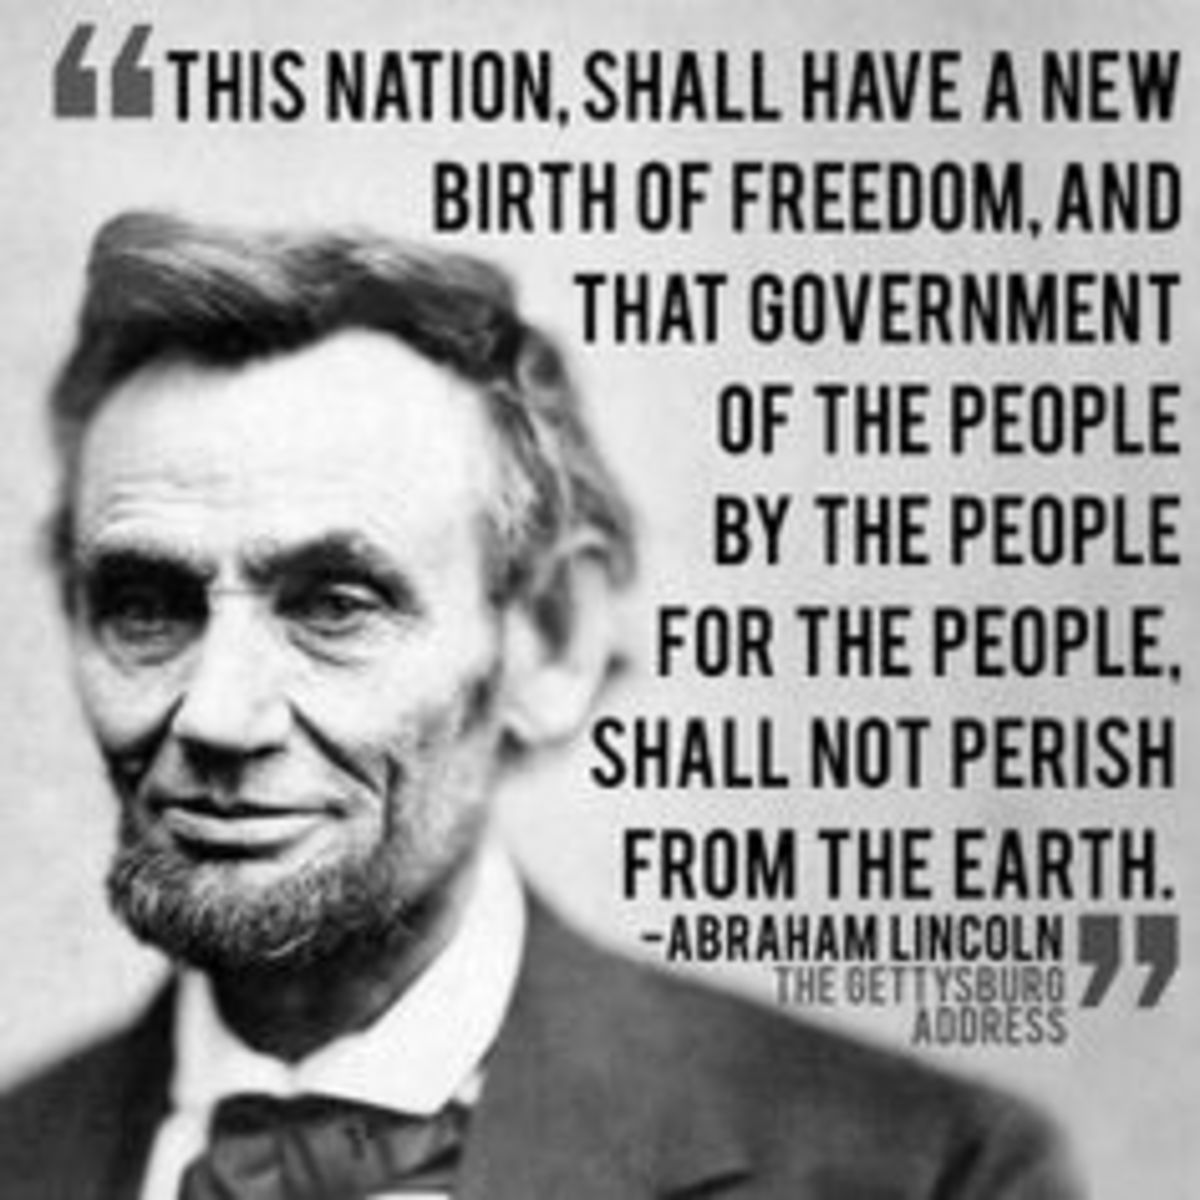 President Lincoln will forever be an important part of American history.